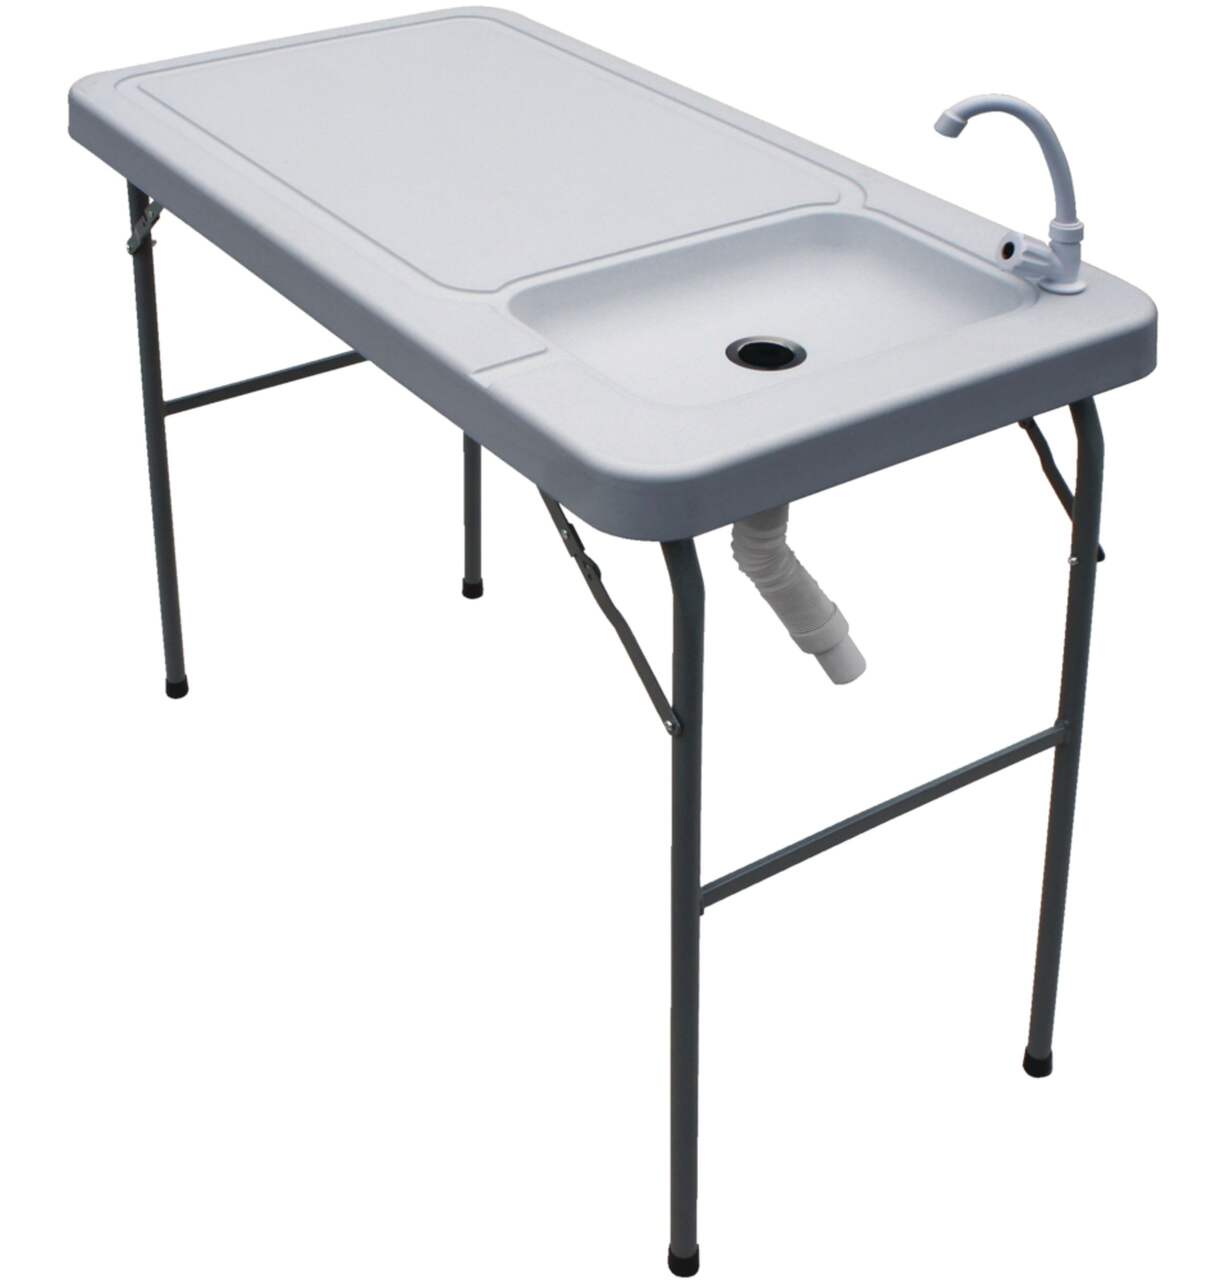 PDG Outdoor Portable Fish & Game Cleaning Table with Built-In Sink & Tap